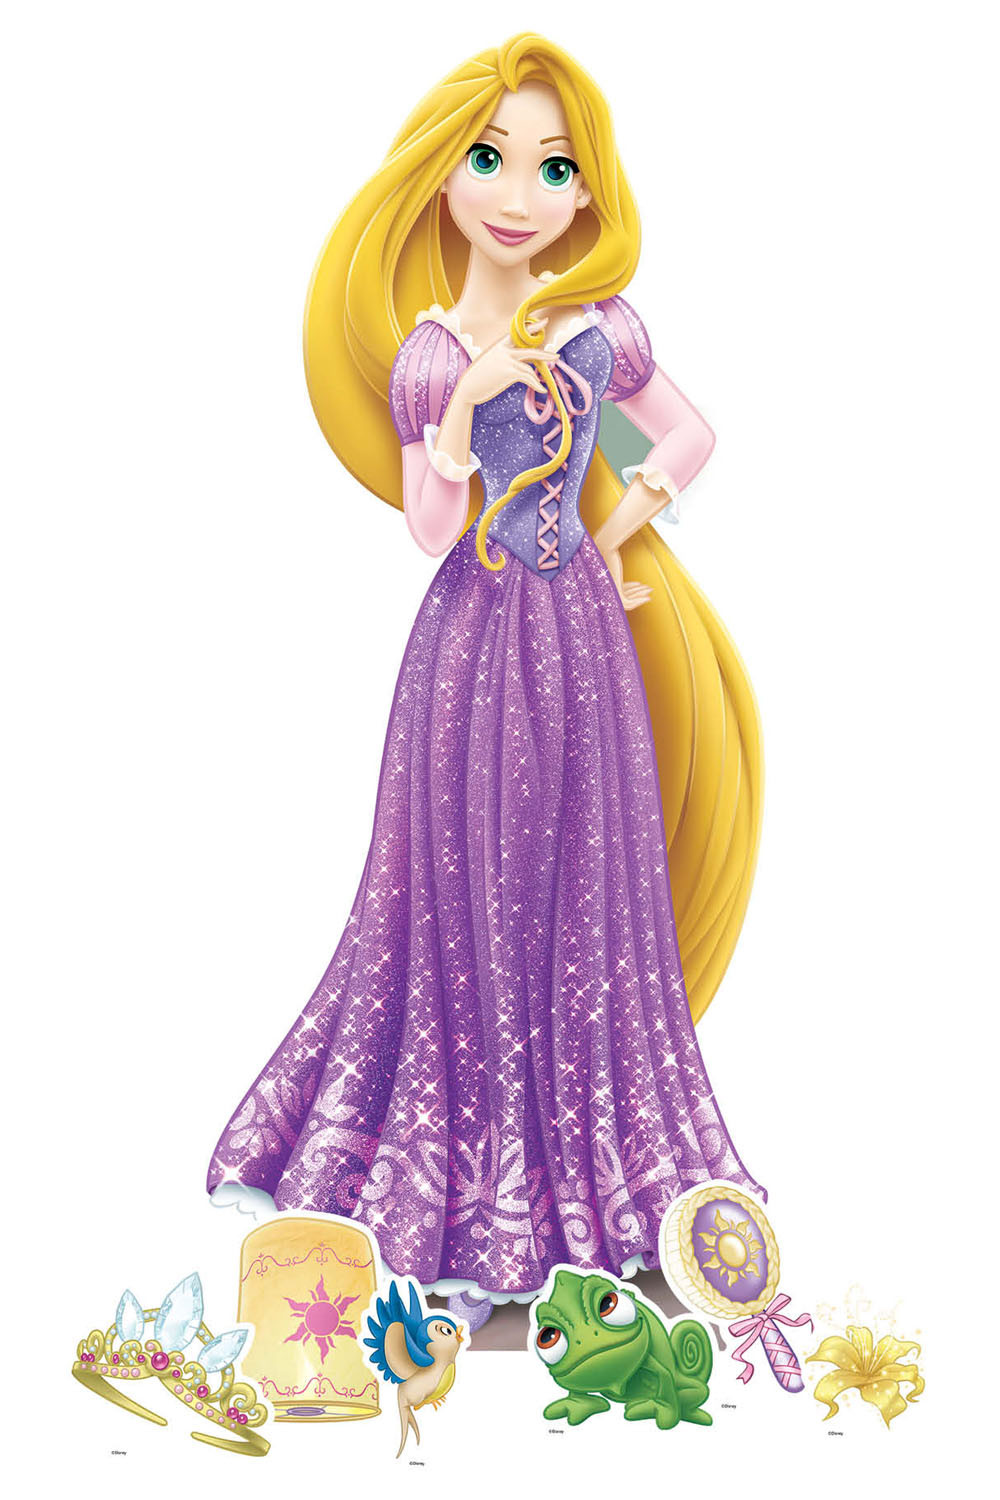 https://cdn11.bigcommerce.com/s-ydriczk/images/stencil/1500x1500/products/89601/95575/Rapunzel-Cardboard-Cutout-Party-Decorations-buy-now-at-starstills__28627.1635862043.jpg?c=2